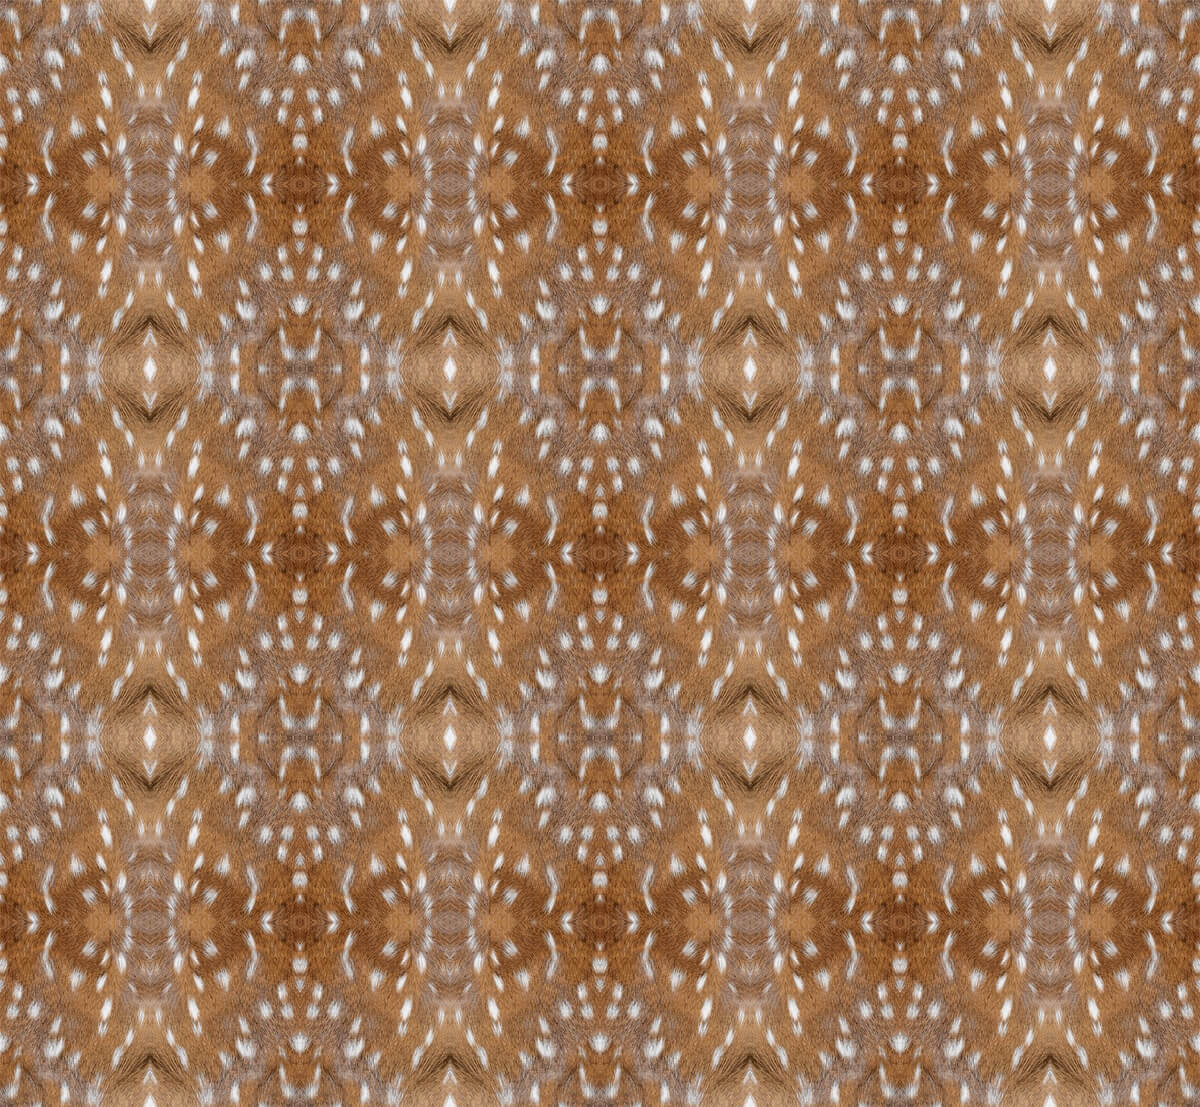 Fawn pattern in fawn (brown) and white